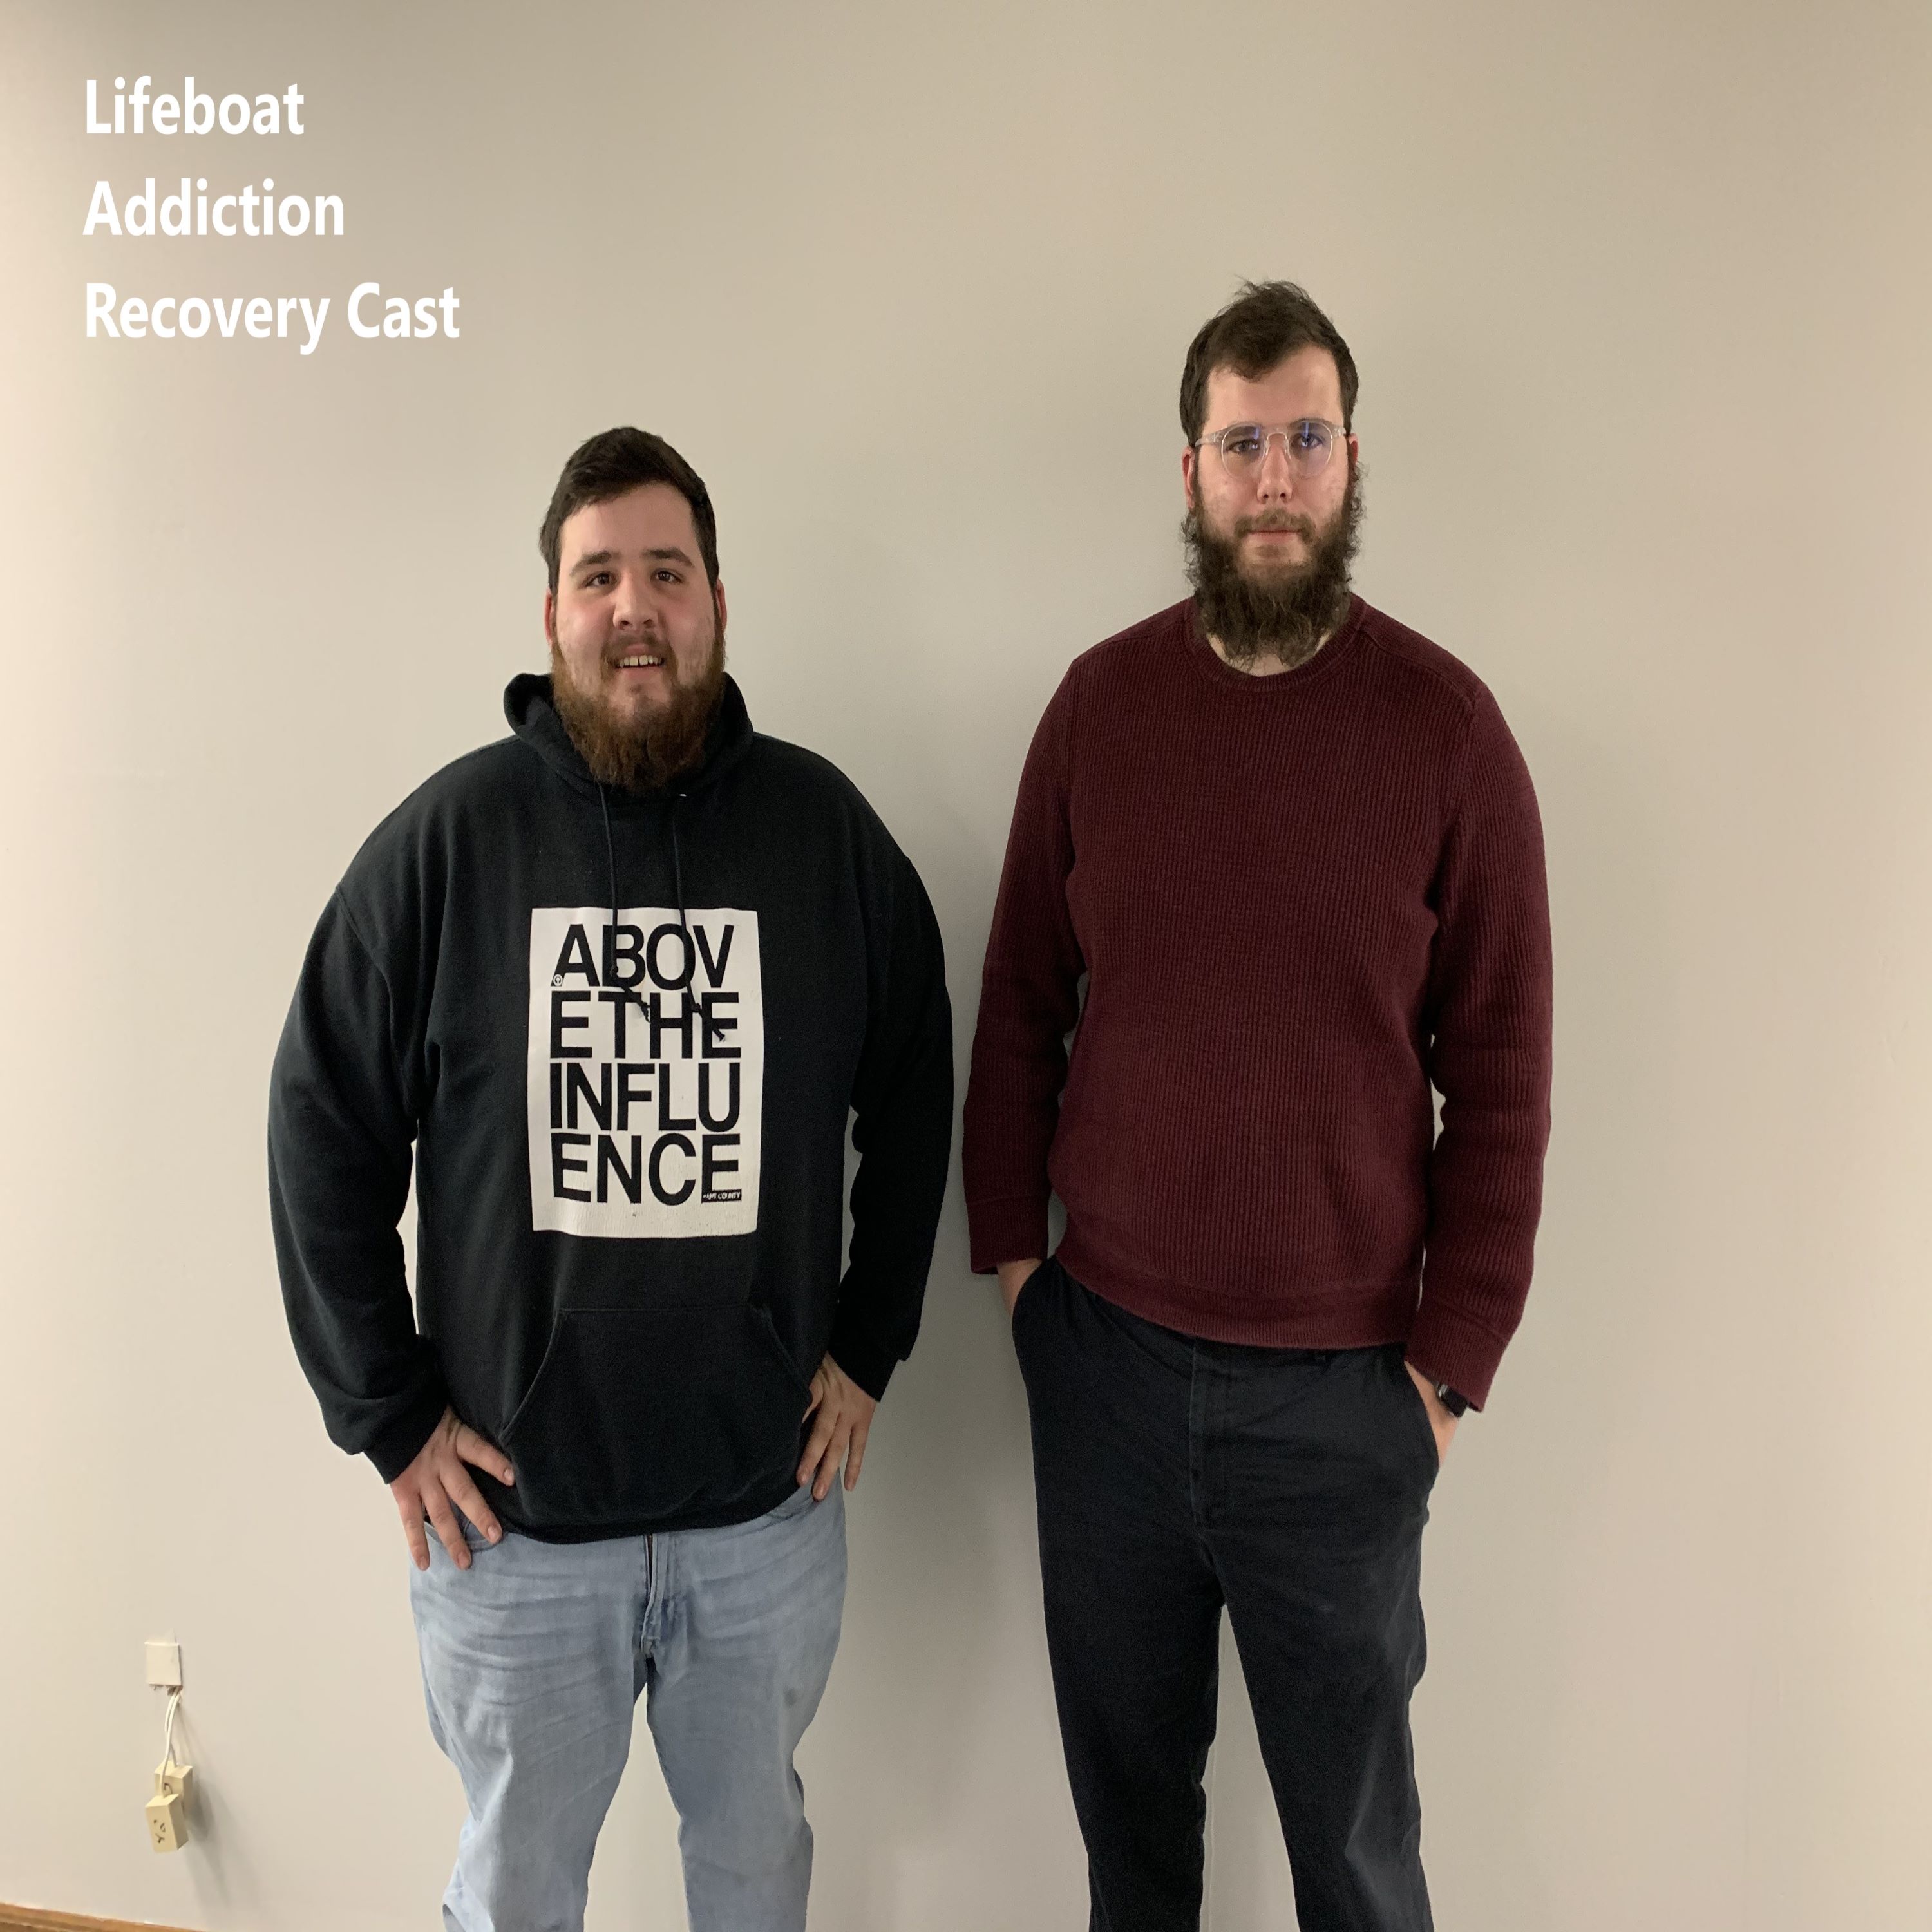 Lifeboat Addiction Recovery Cast